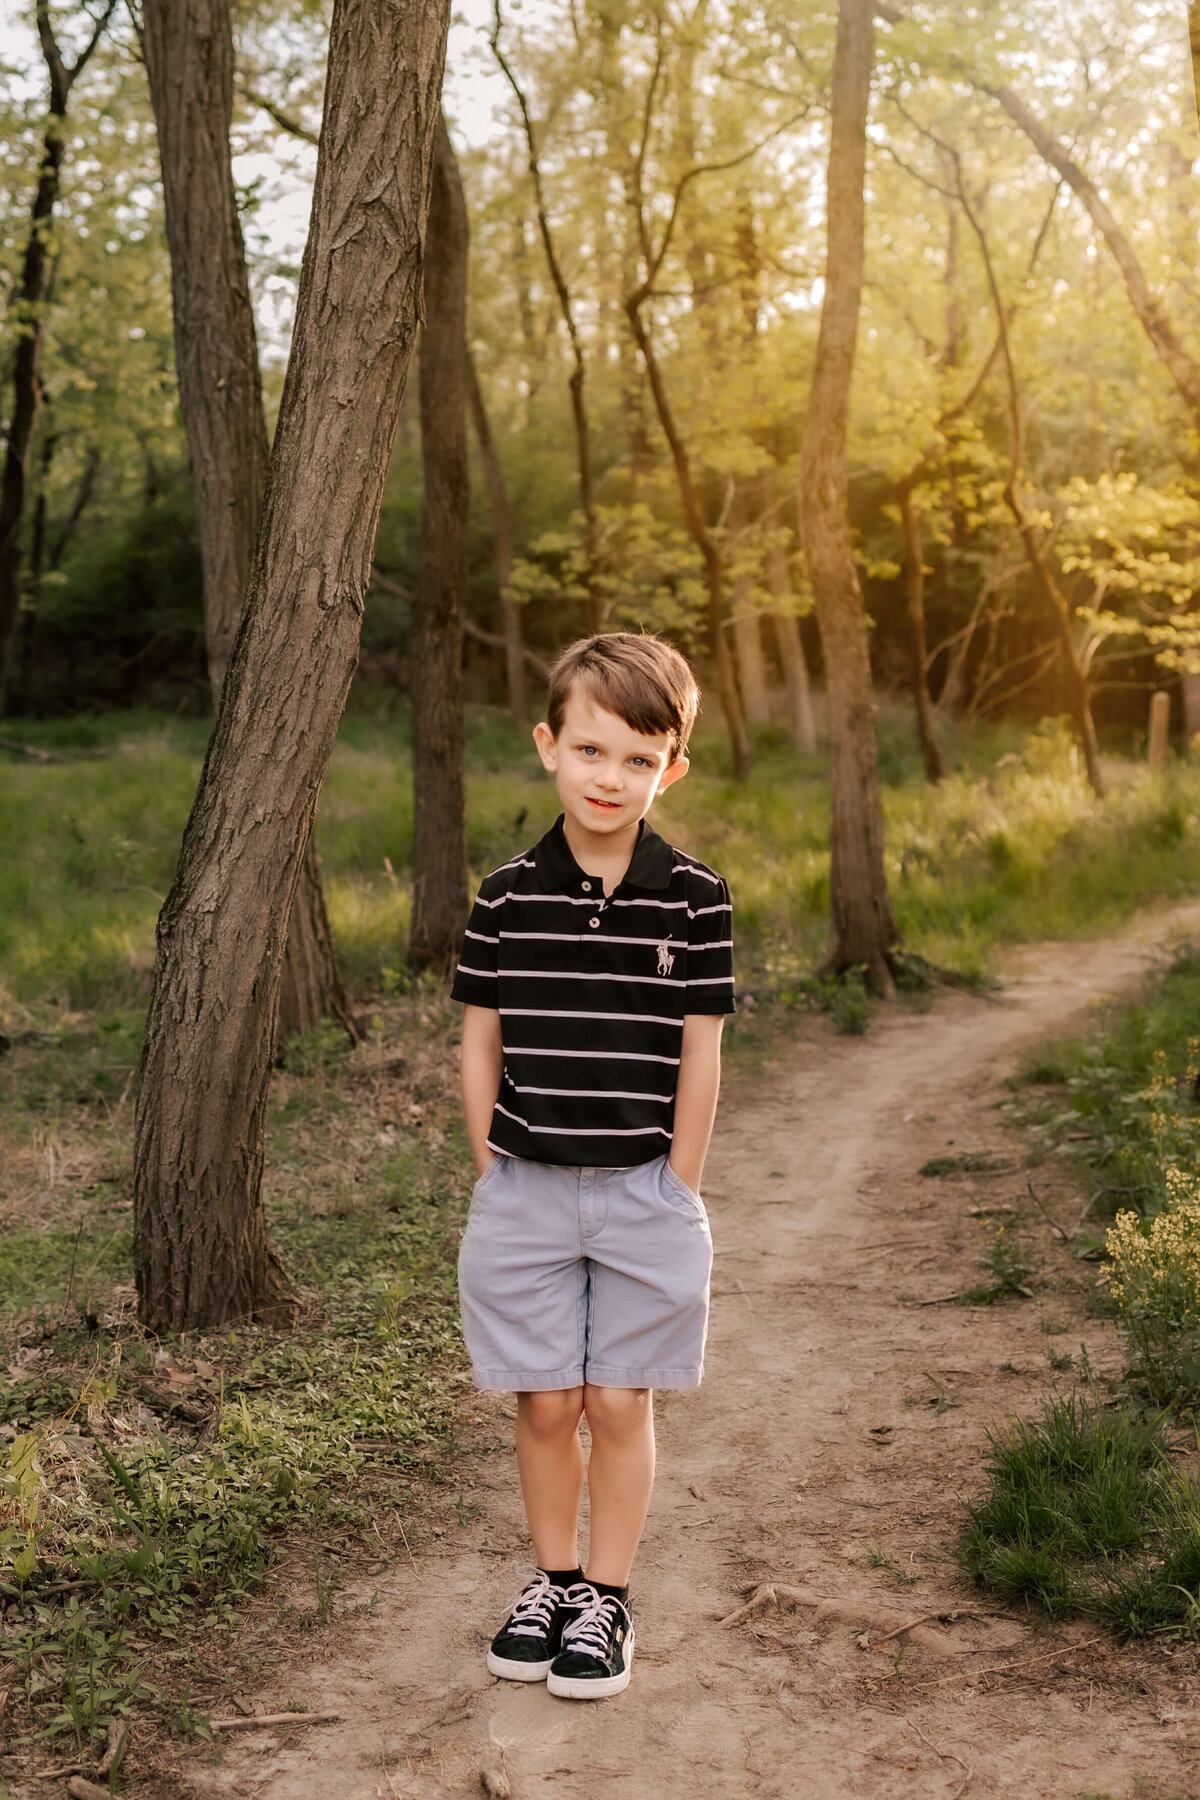 A little boy standing on a dirt pathway in the middle of the forrest.